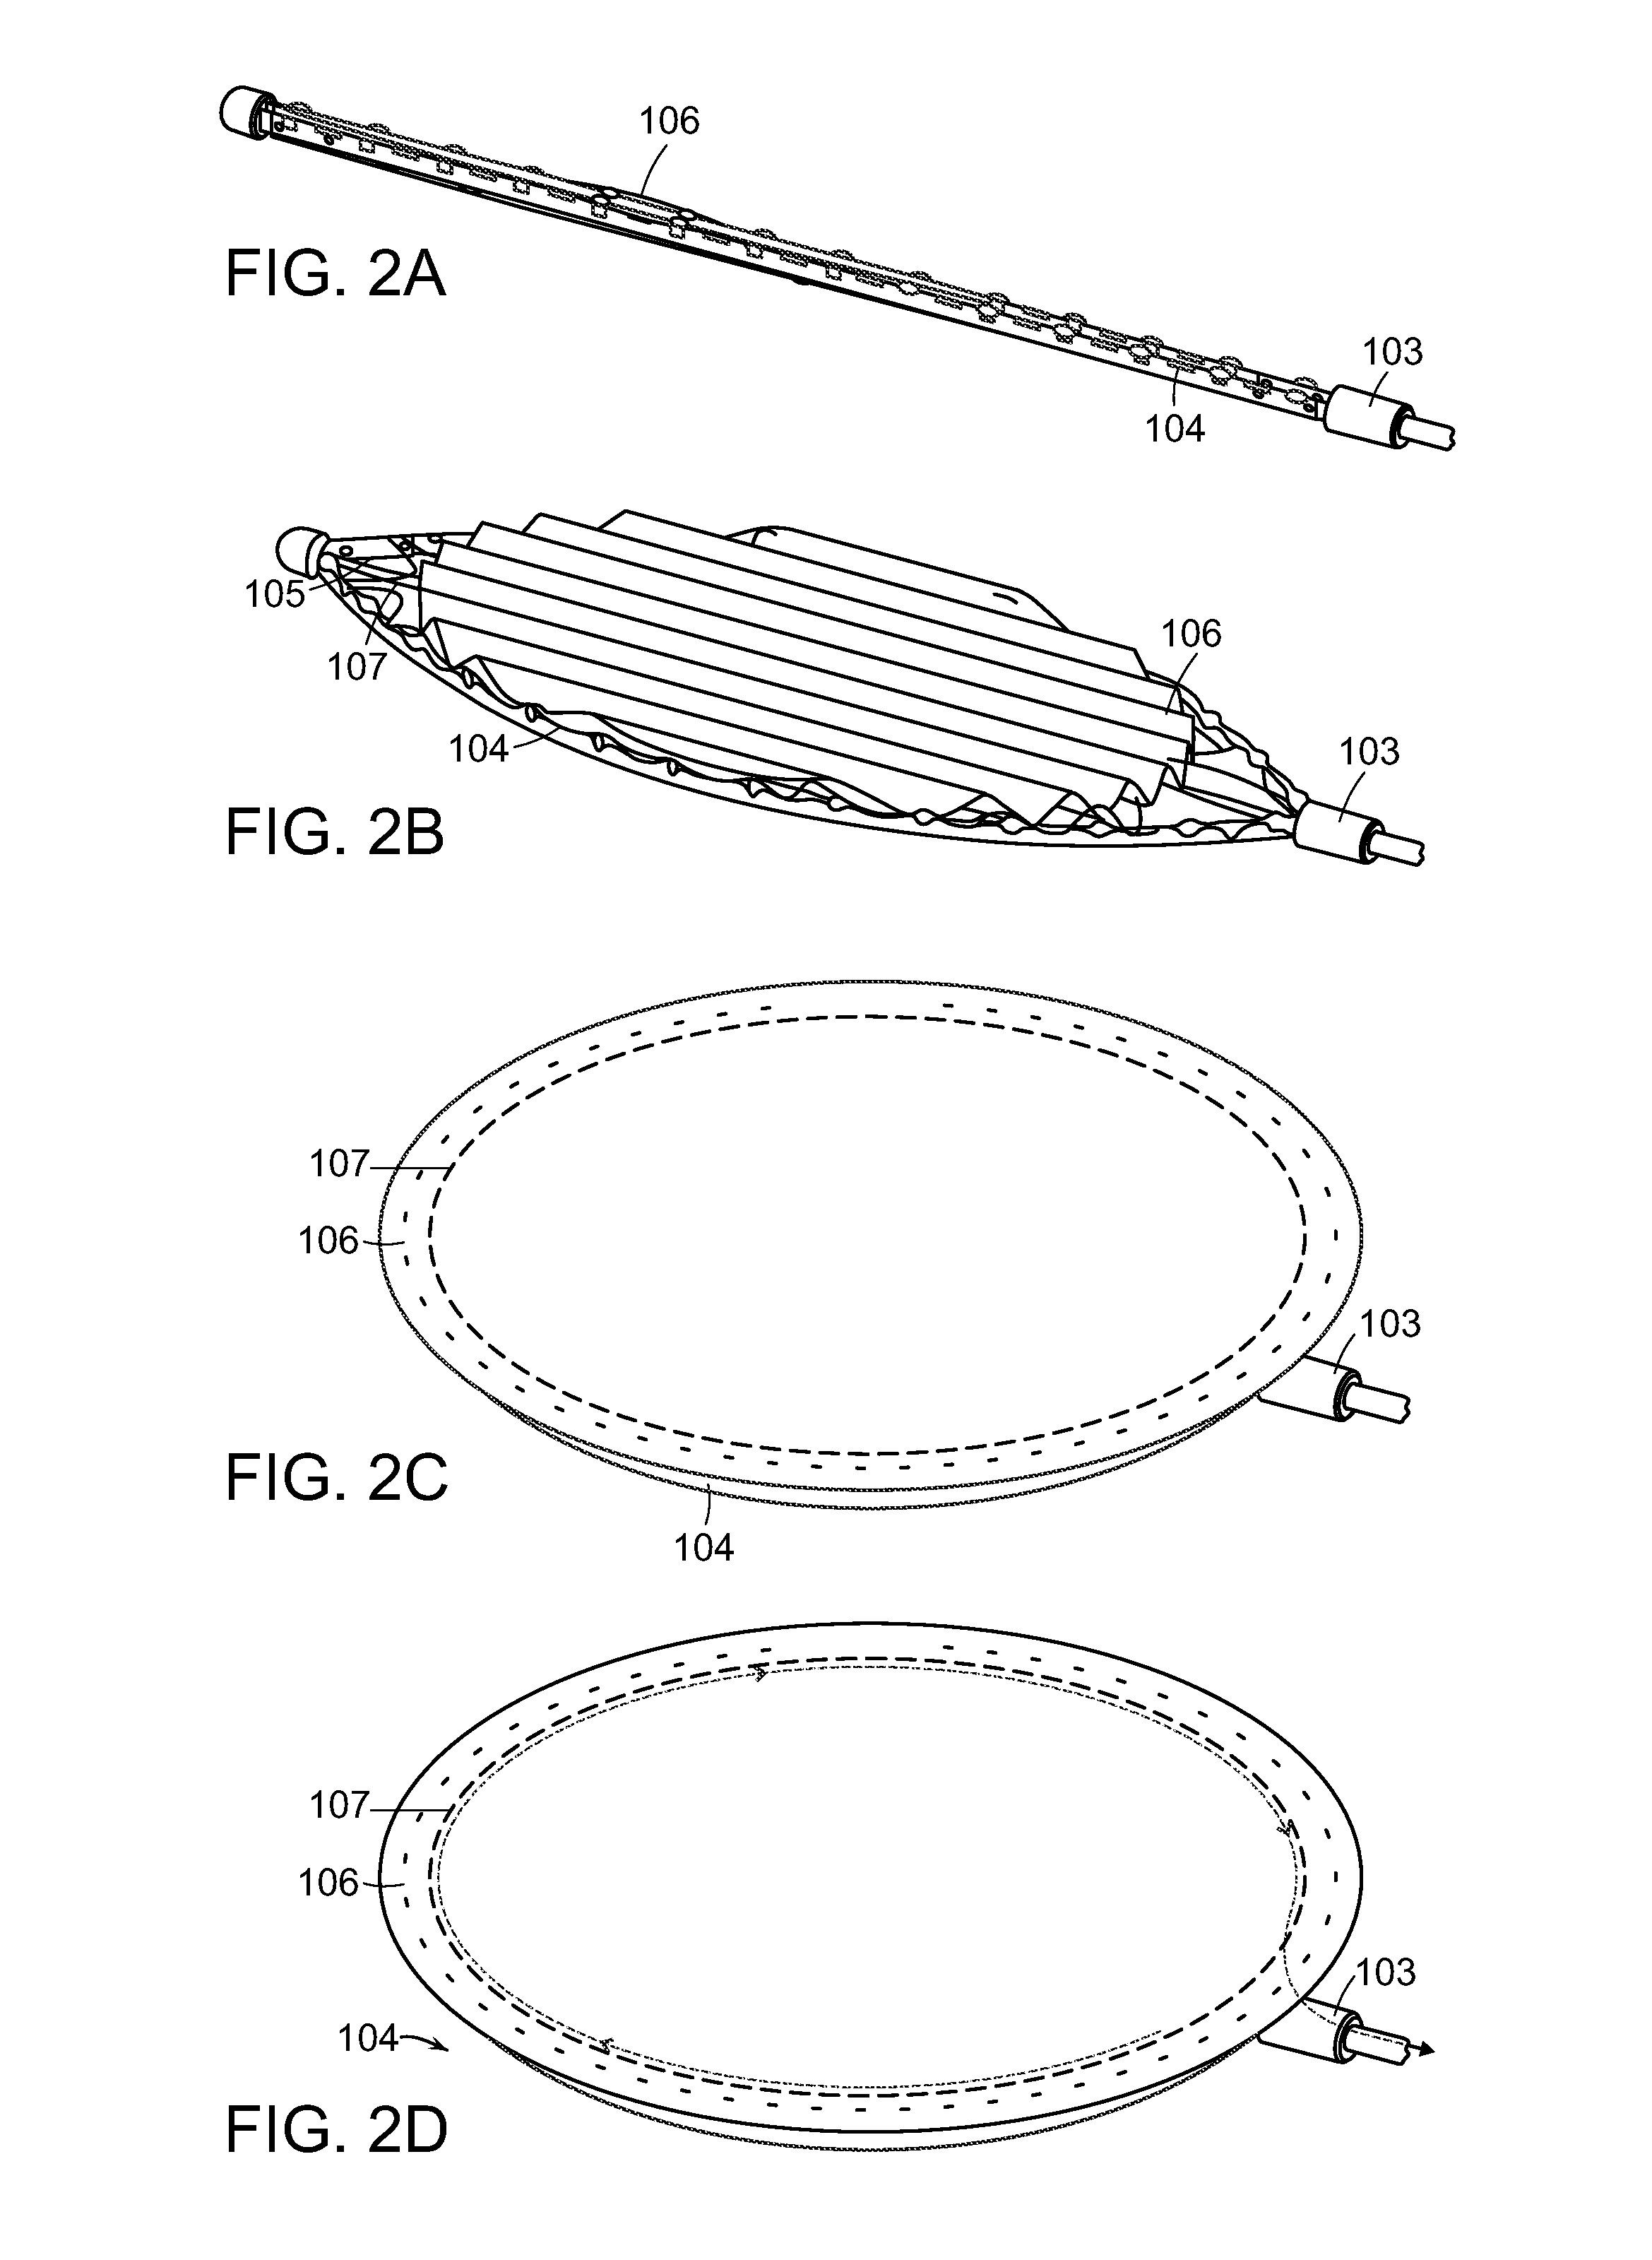 Device and method for deploying and attaching an implant to a biological tissue